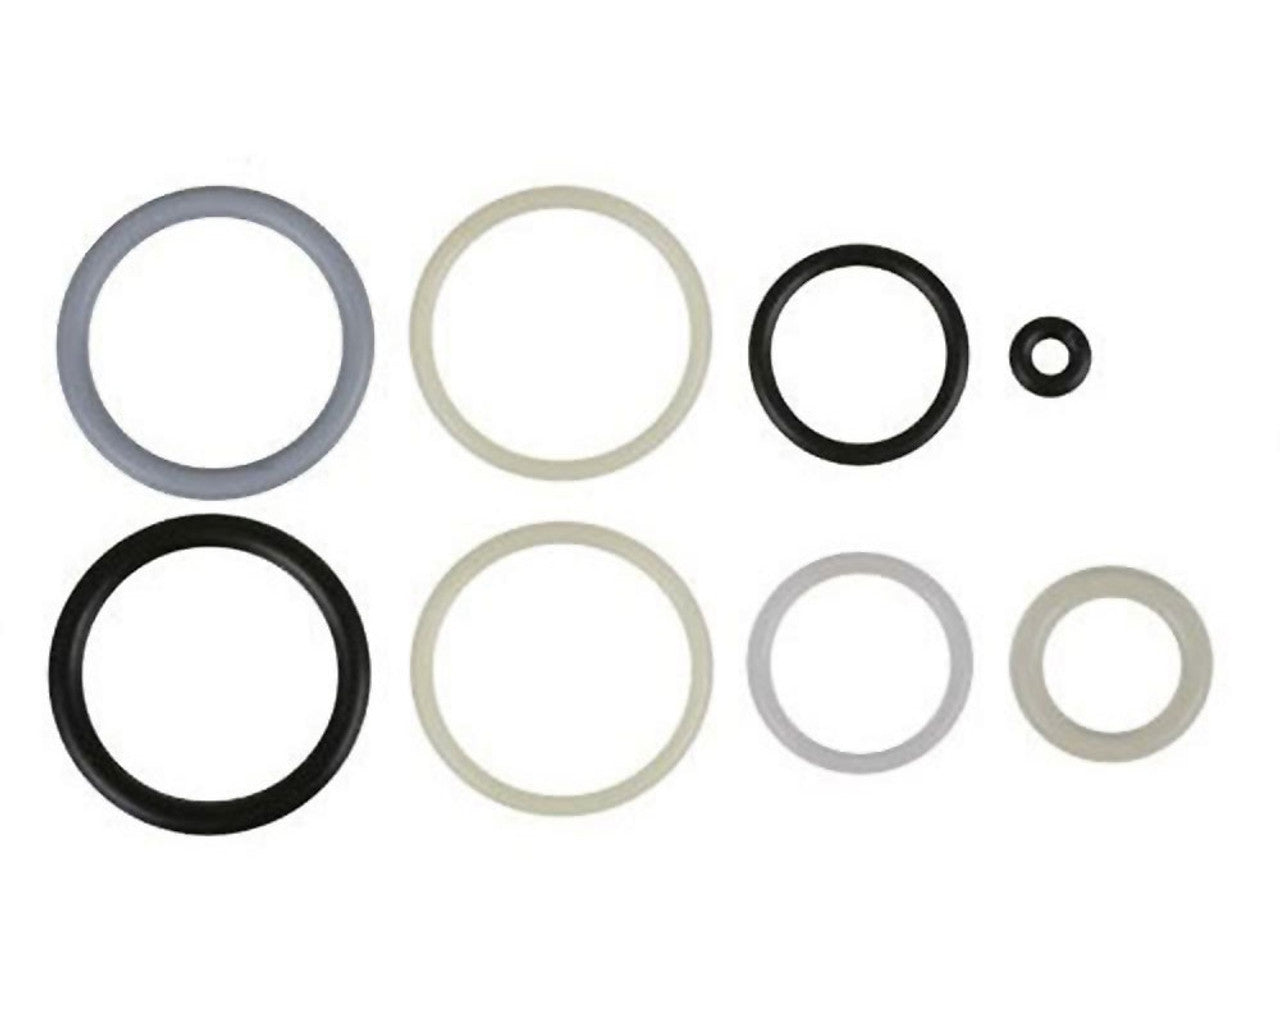 Tippmann A5 Replacement Parts Kit - O-Ring Kit (T201200)